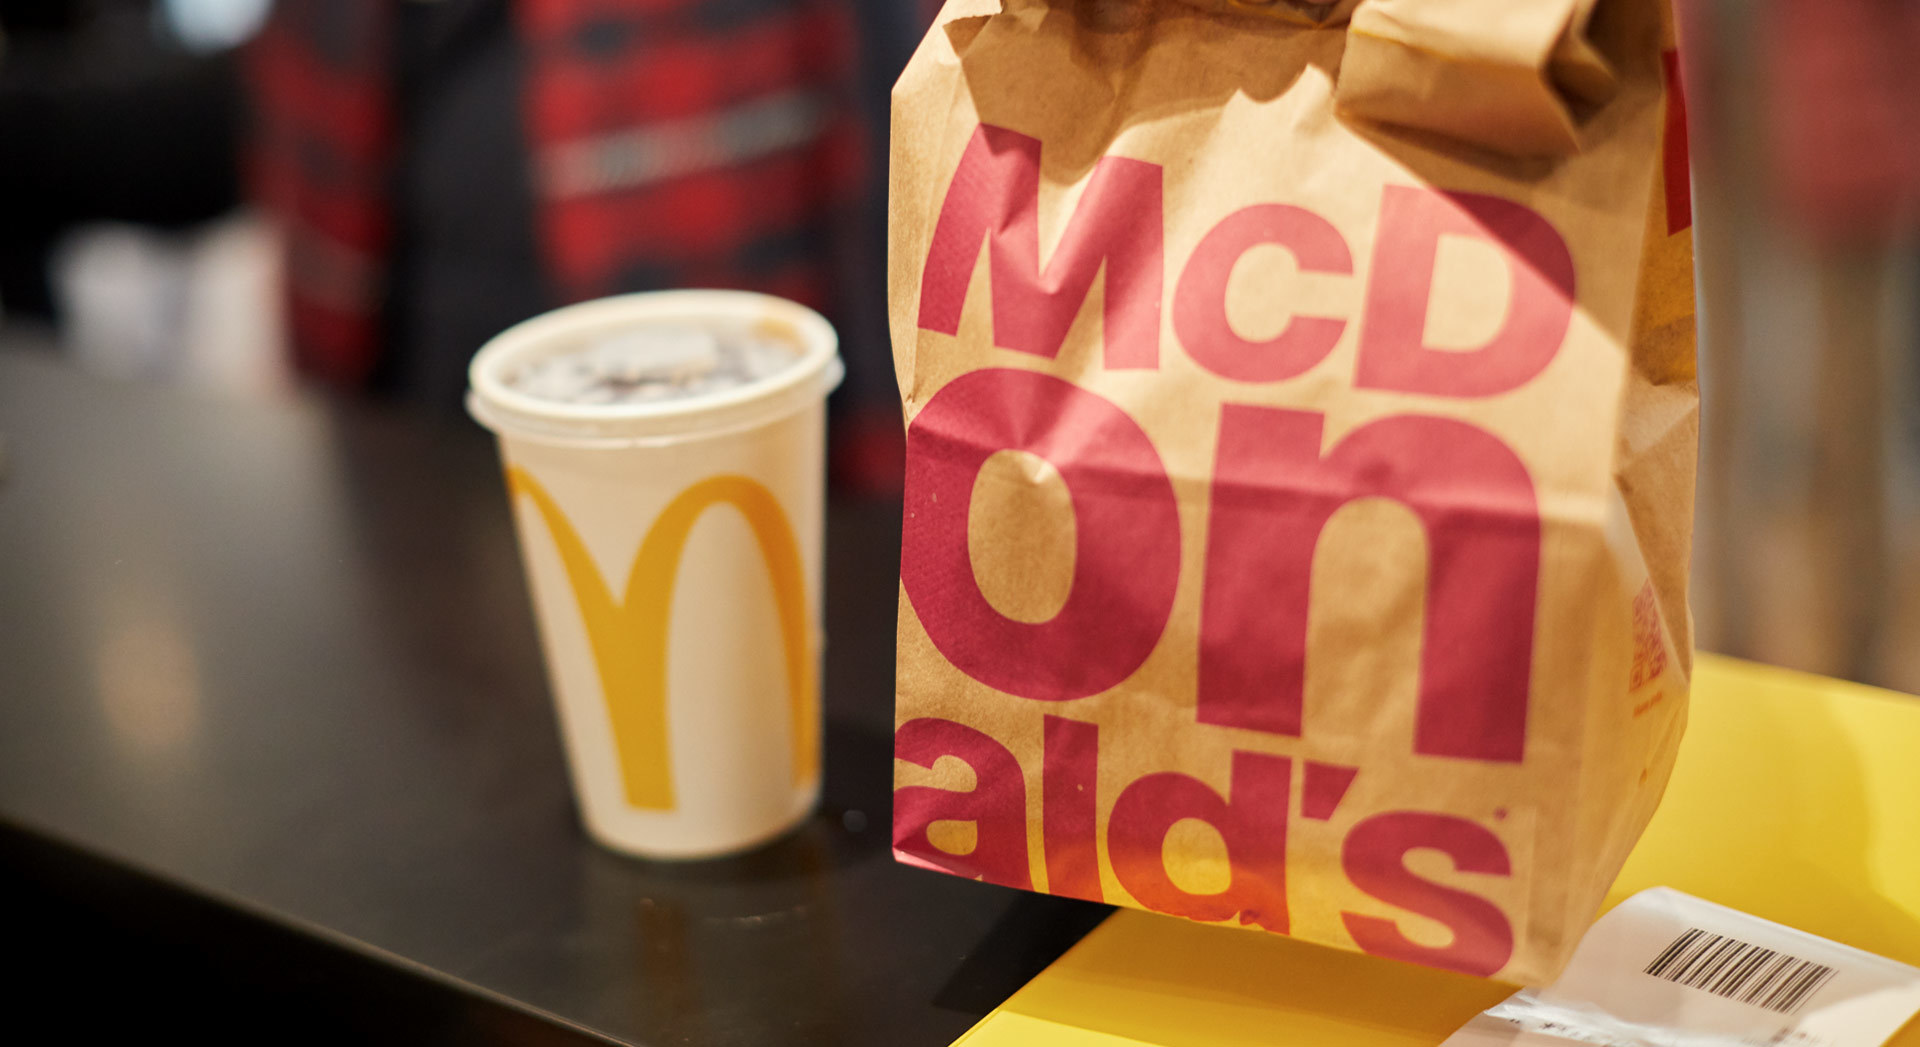 Know Our Food - McDonald's may not use 'pink slime' now, but they have in the past. How can we trust them after we know they only want money?